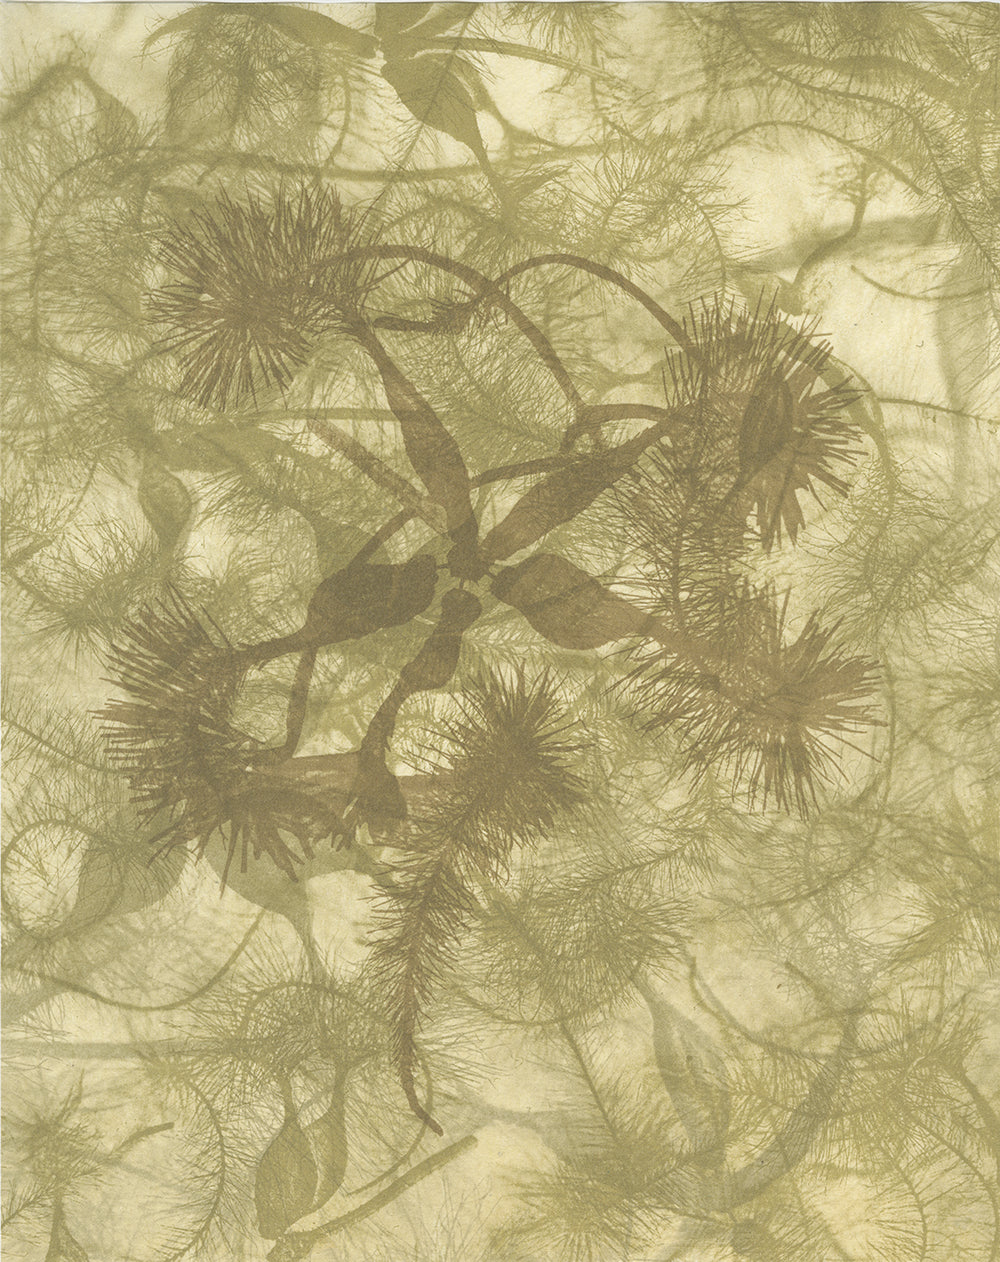 Sally Ayre - Shift #4 (Clematis)